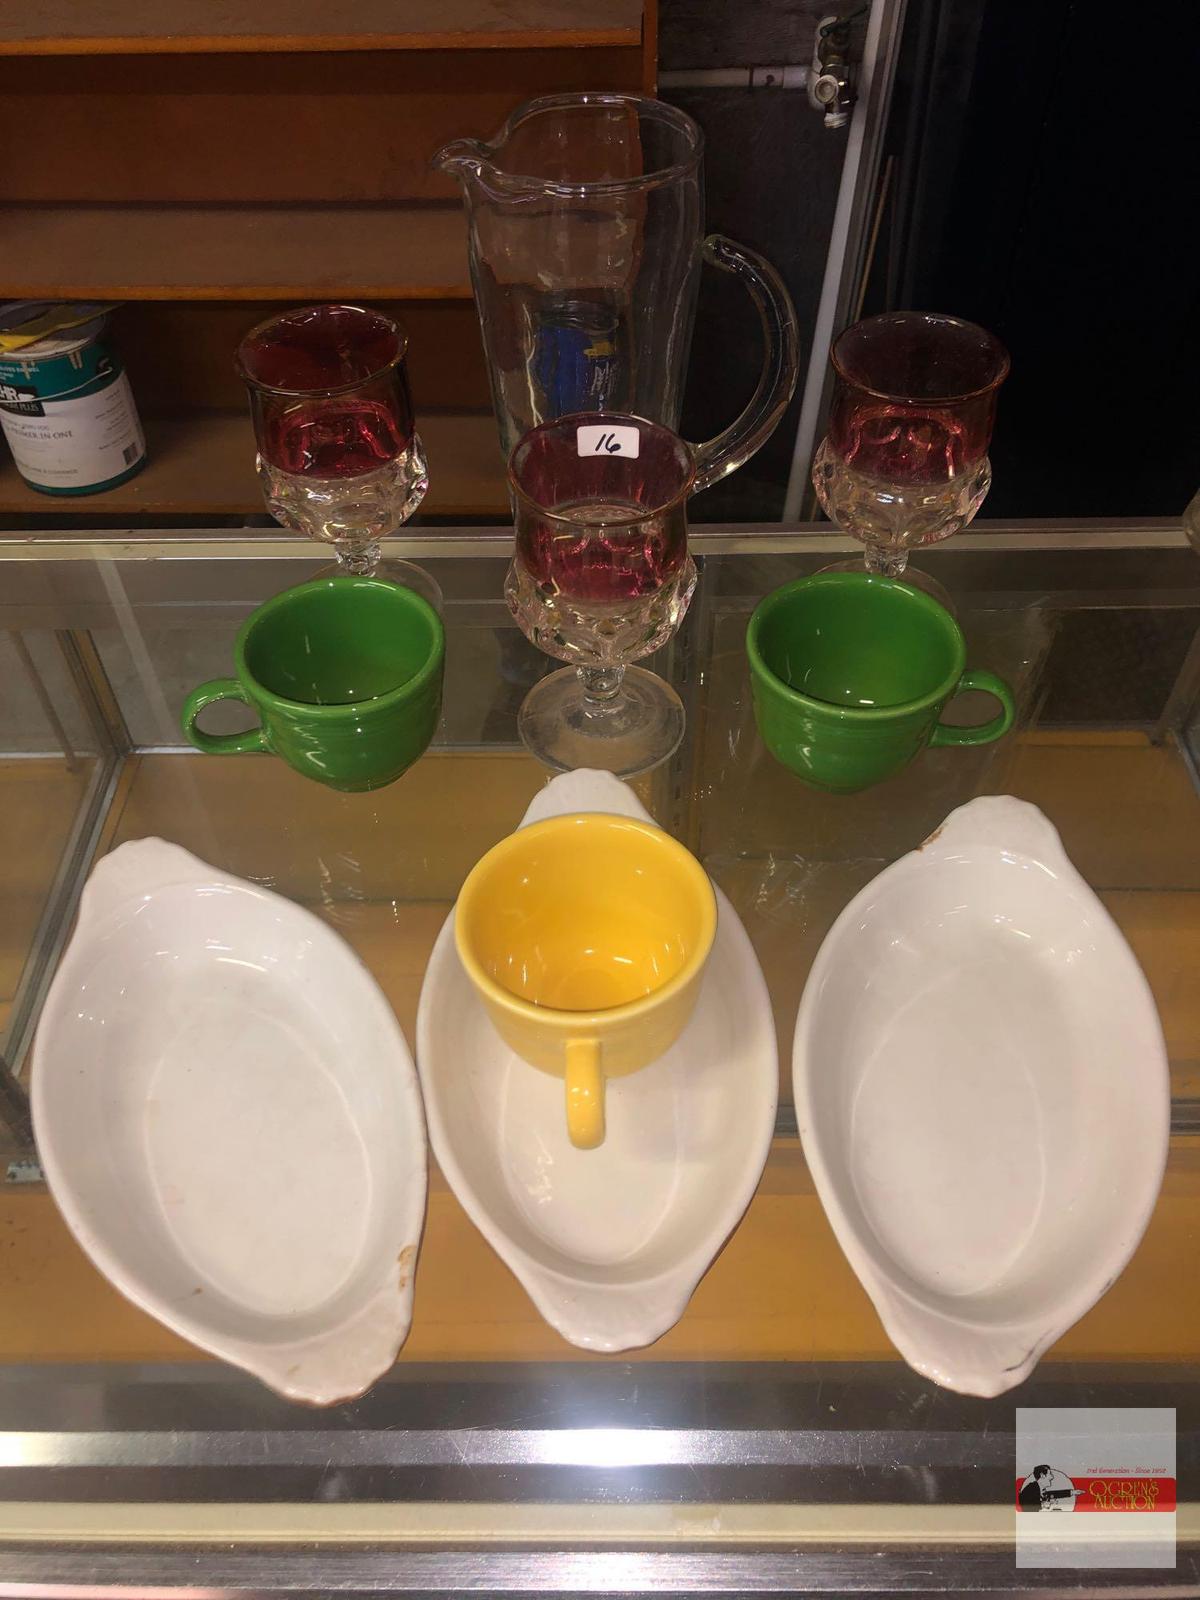 Dish ware - 10 items - 3 Hall oval dishes 9.25"wx5"w, 3 Fiesta cups 2.75"h, 3 Ruby flash goblets 5.5